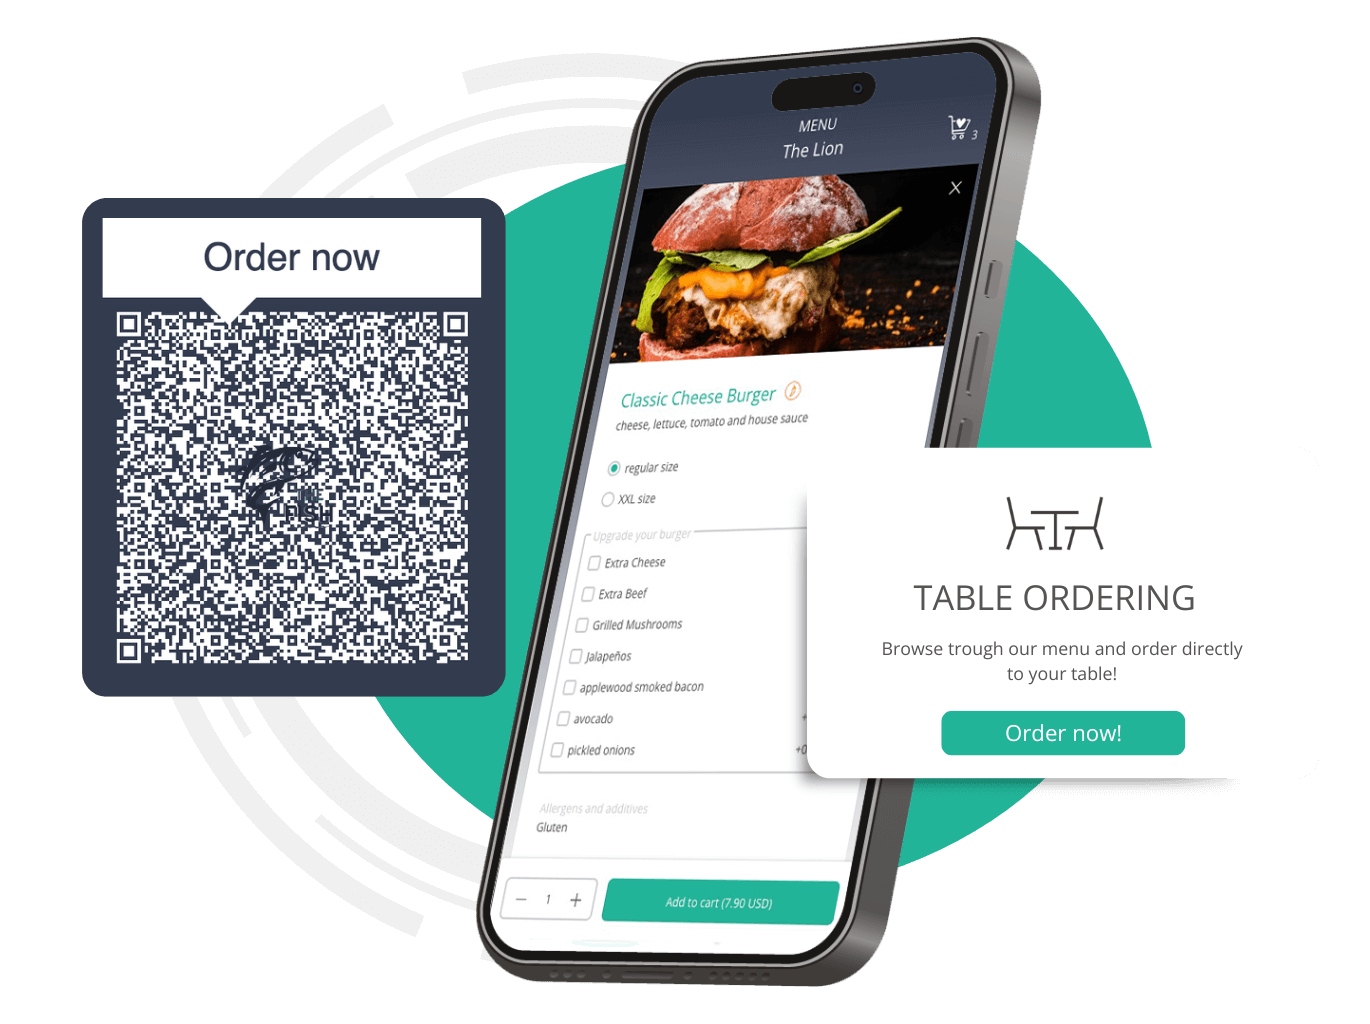 Self Ordering in restaurants by using a QR Code